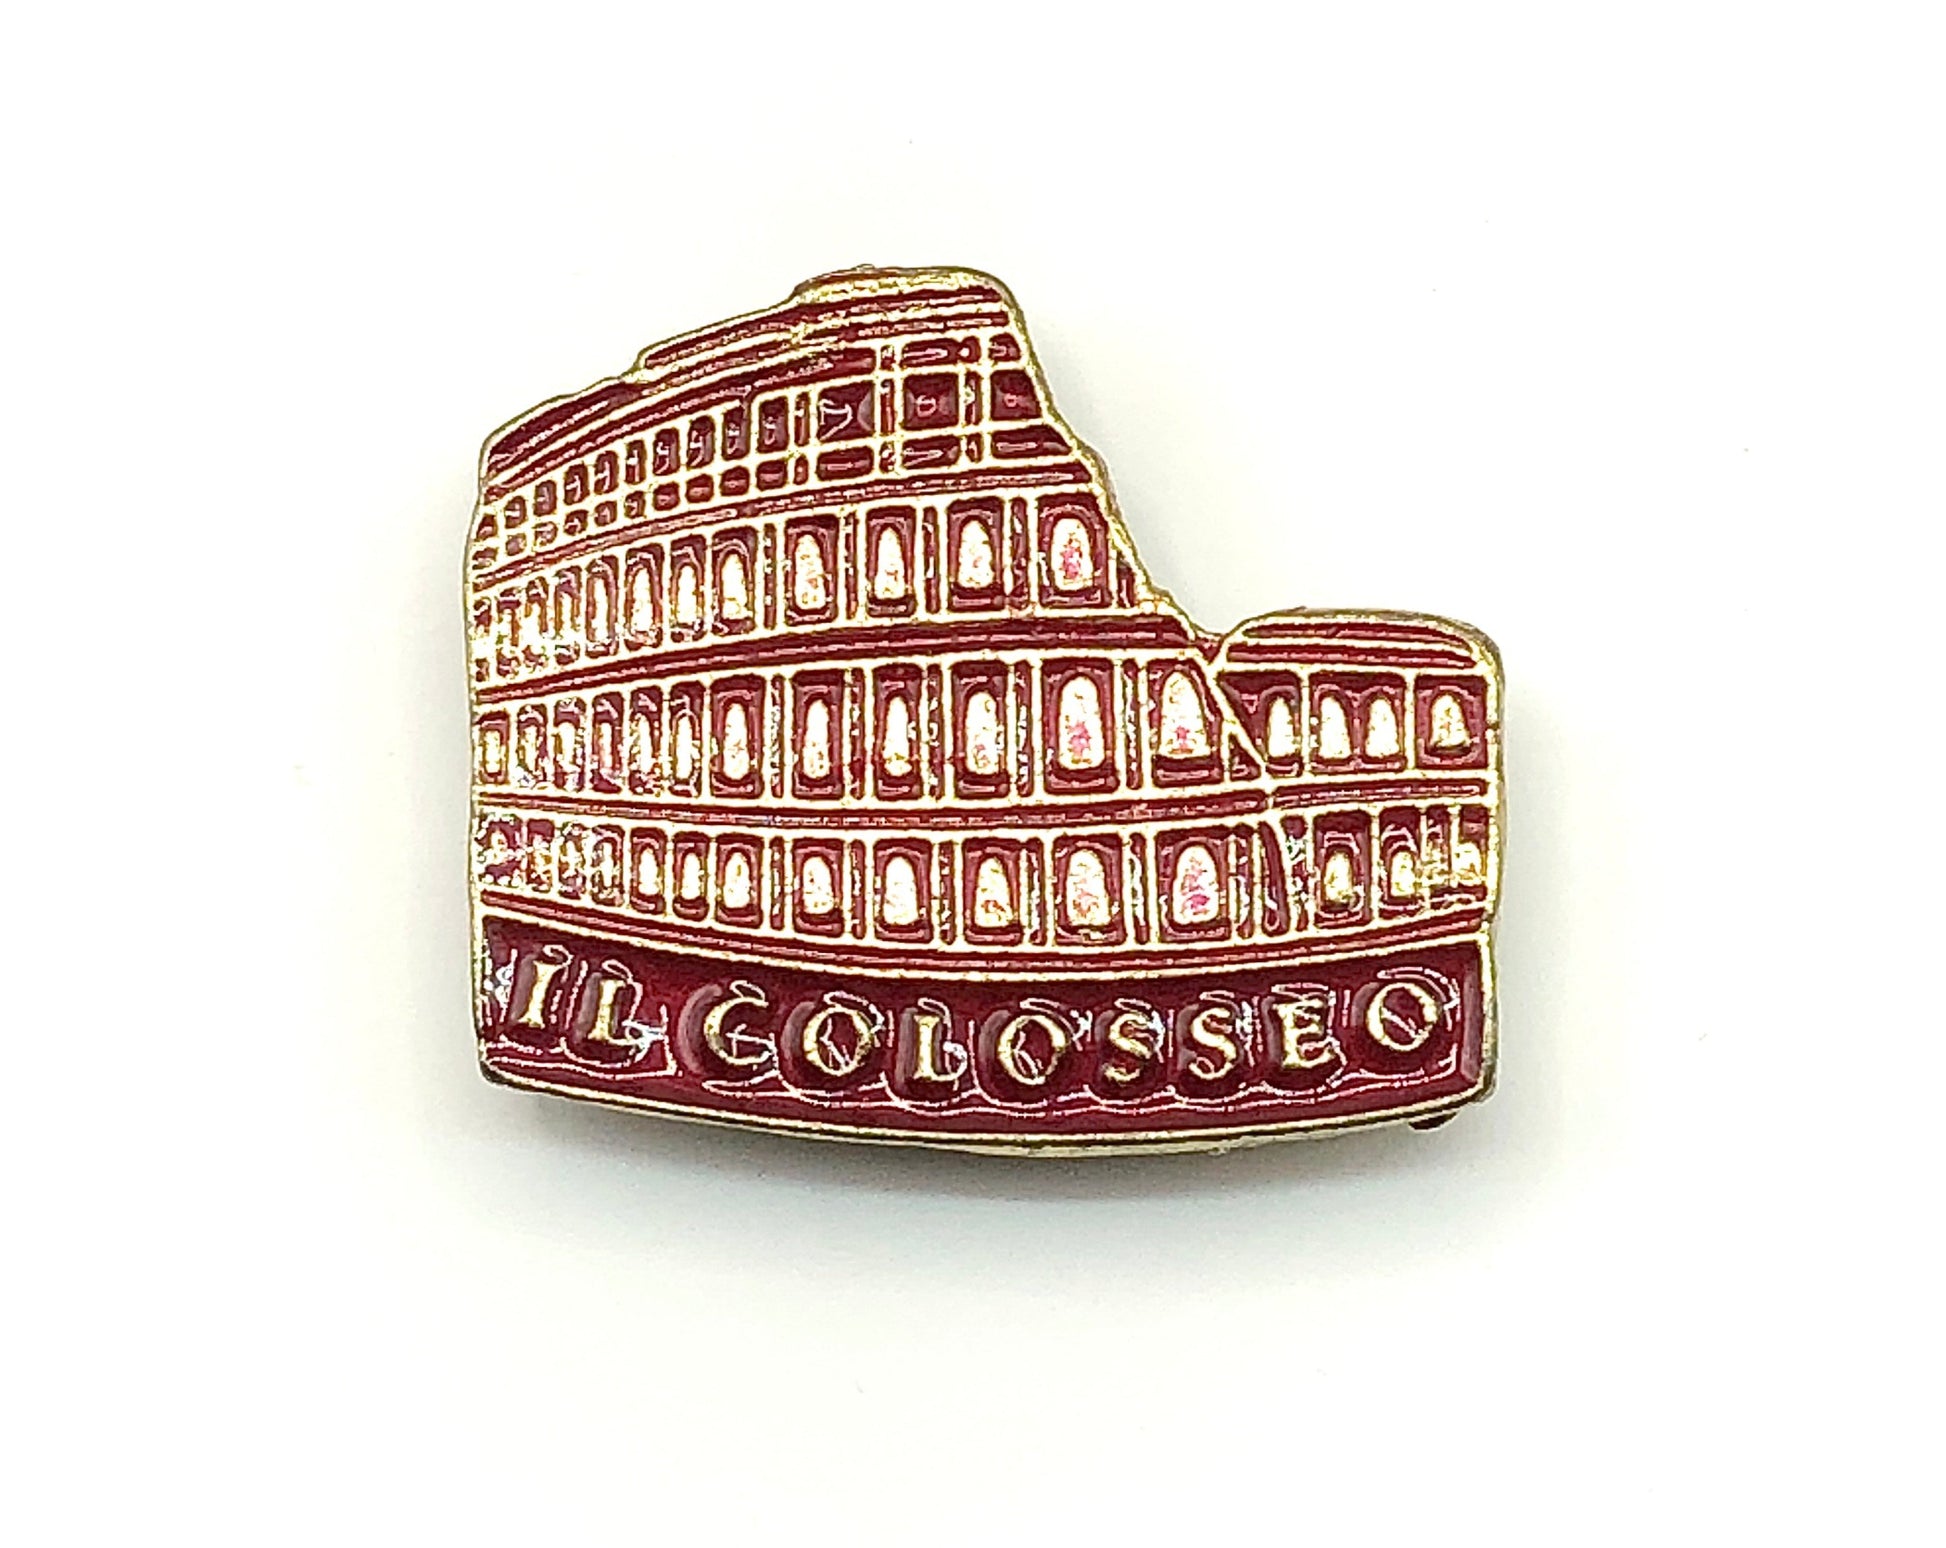 The Colosseum, iL Colosseo Restaurant or Rome Italy Refrigerator Magnet - Pre-owned Home Decor